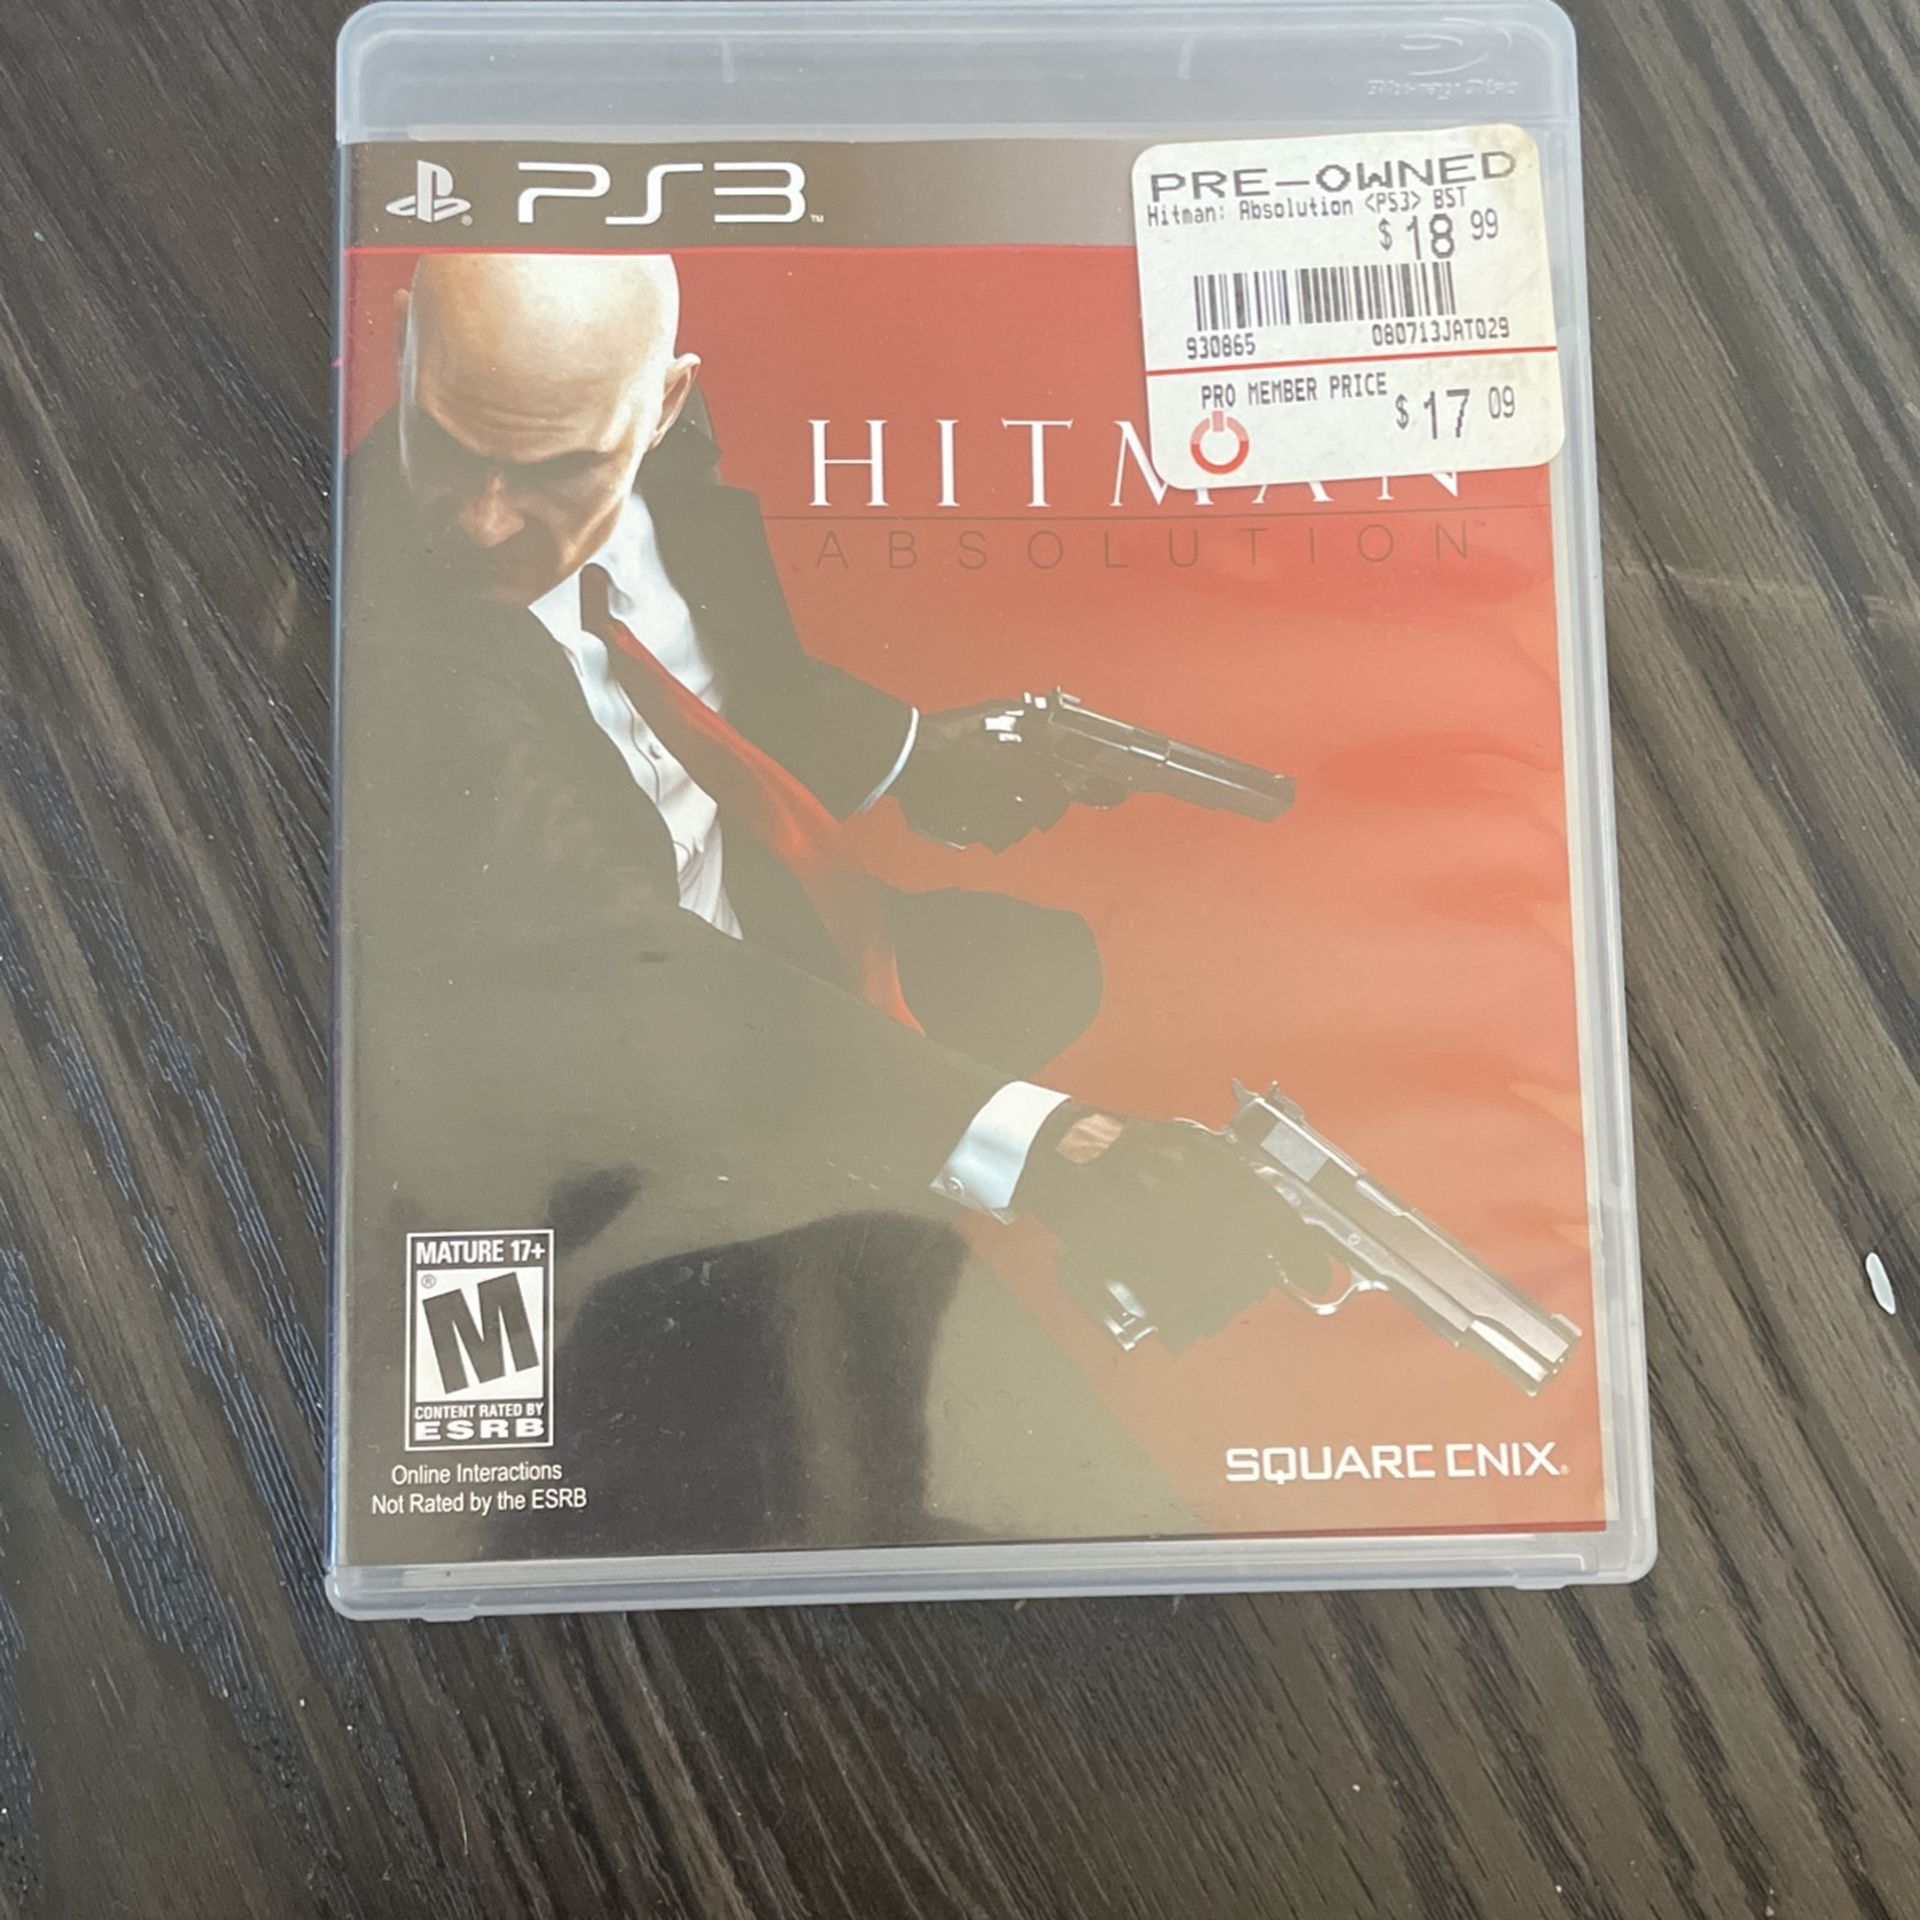 PS3 Hitman Absolution